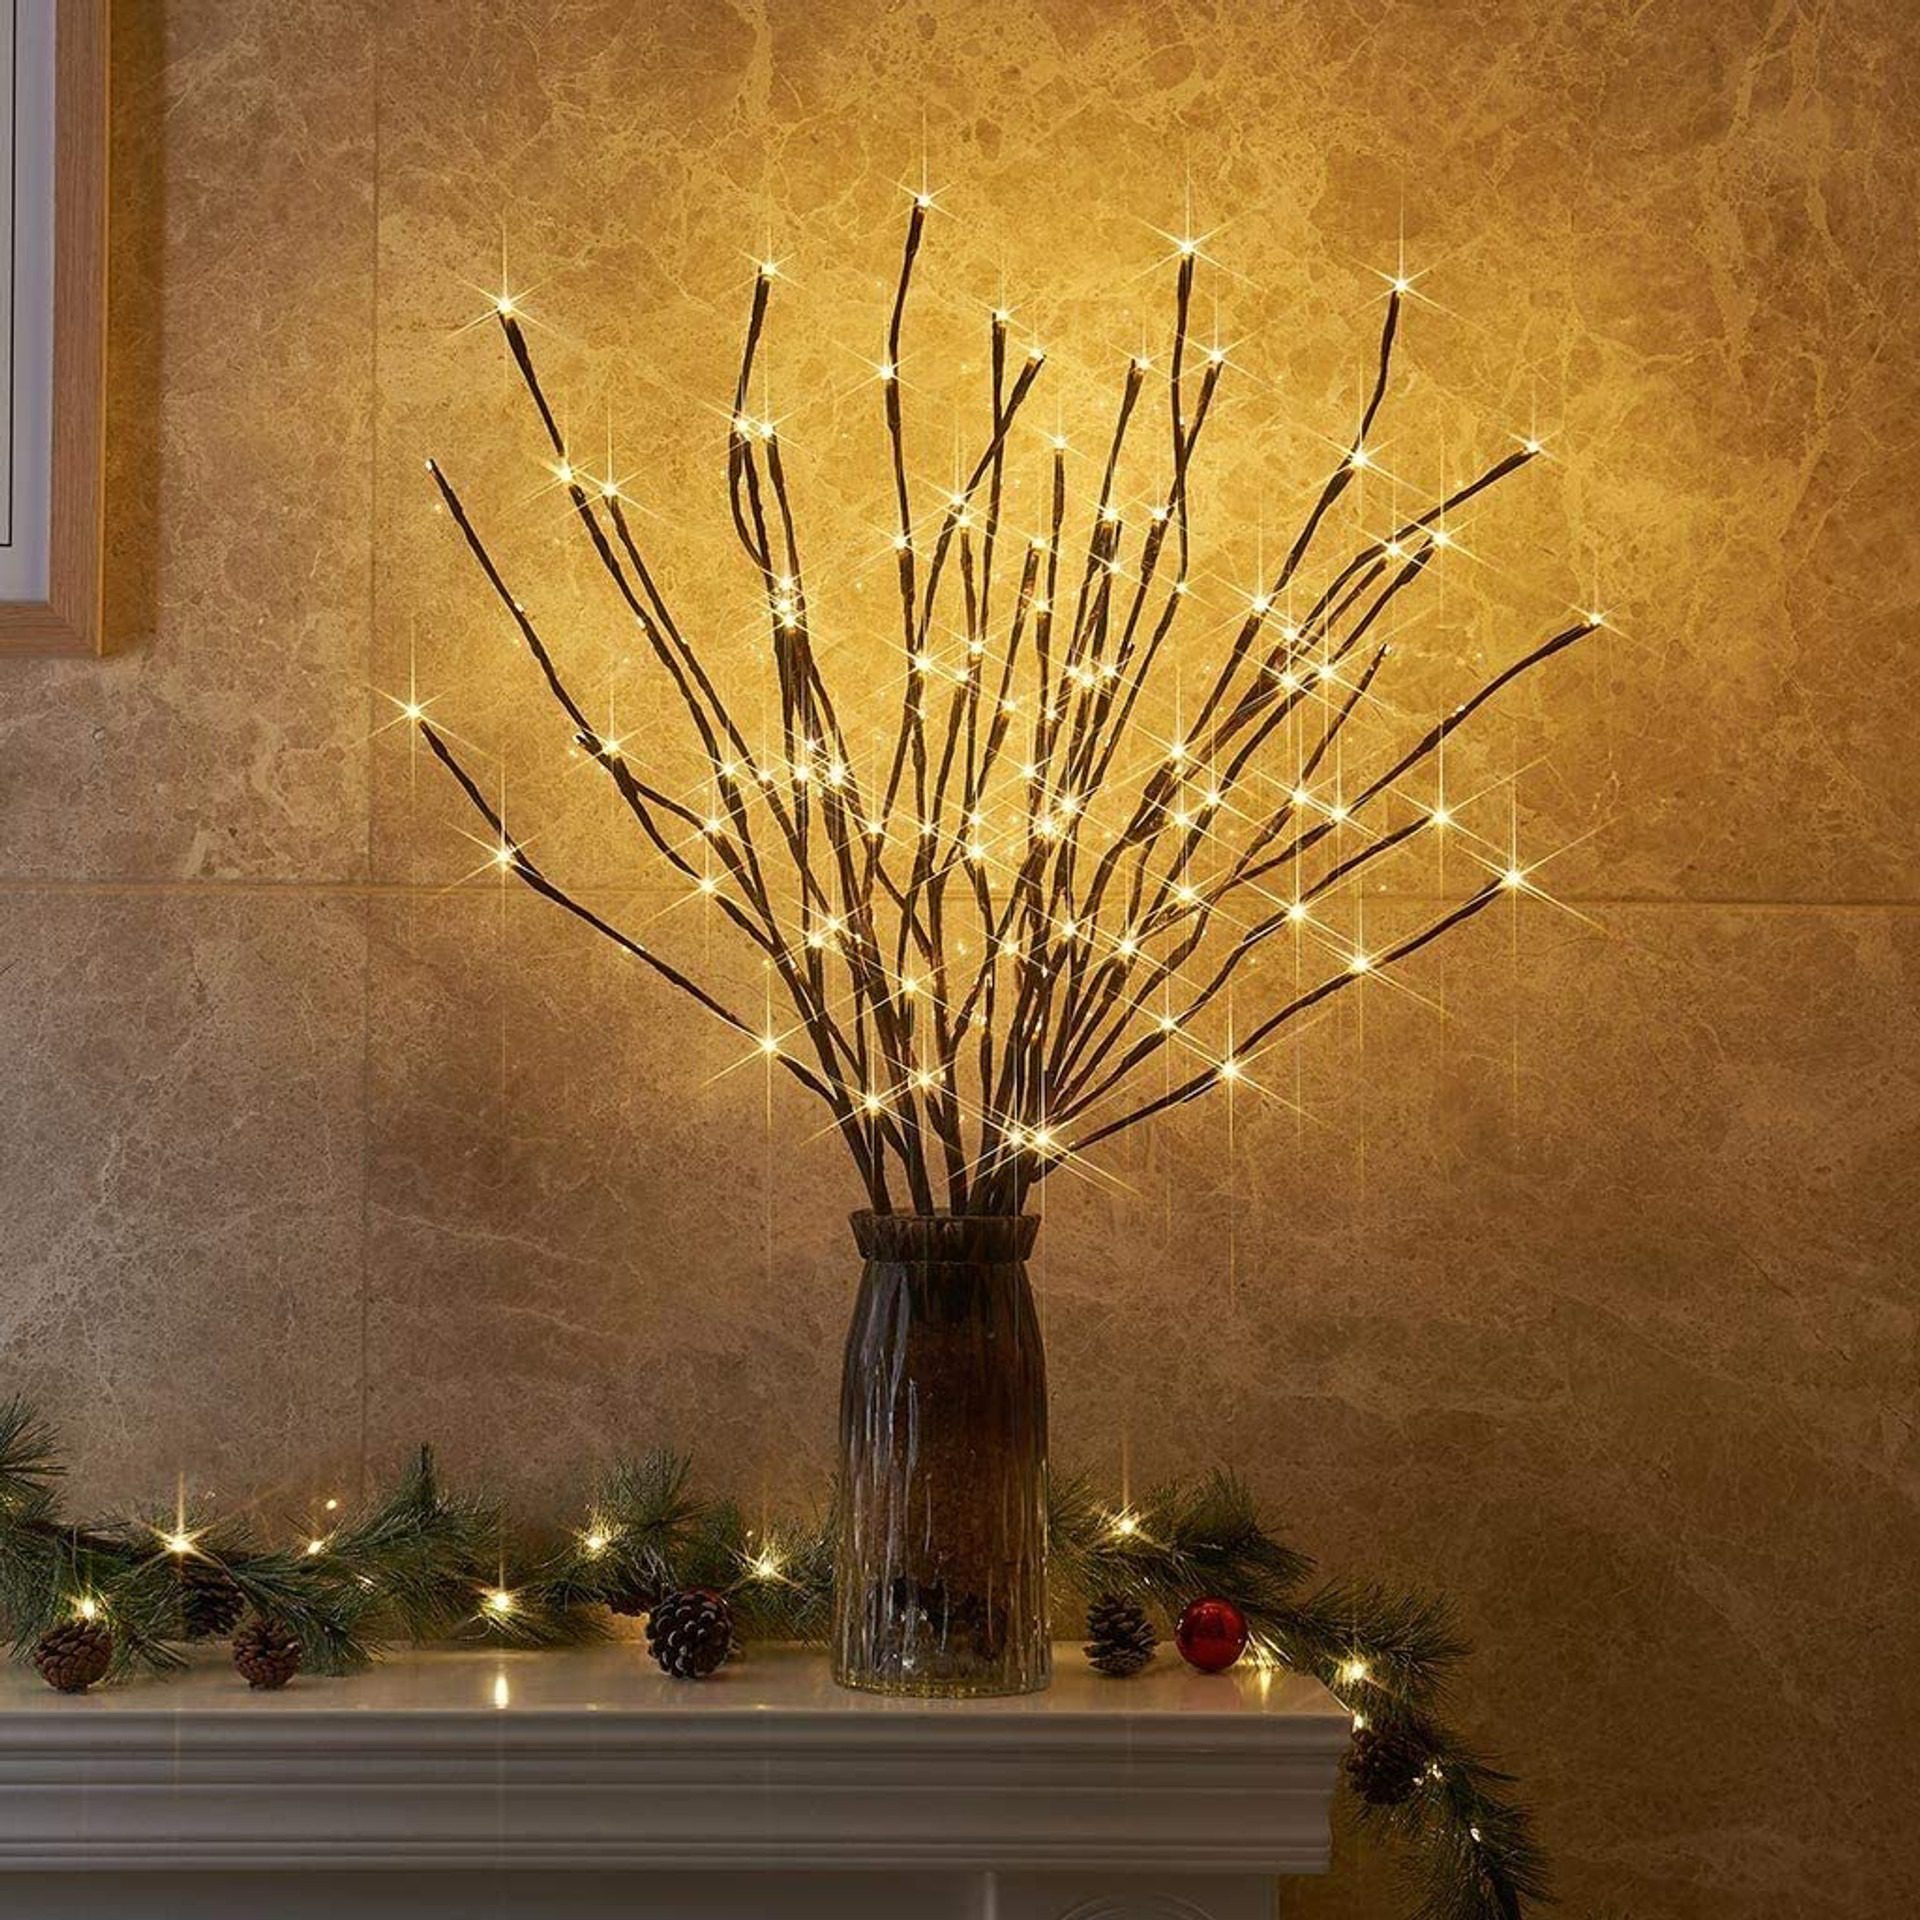 Light Up Your Home with 5 Pack of 100 LED Twig Branches – Perfect for Holiday Decorations!